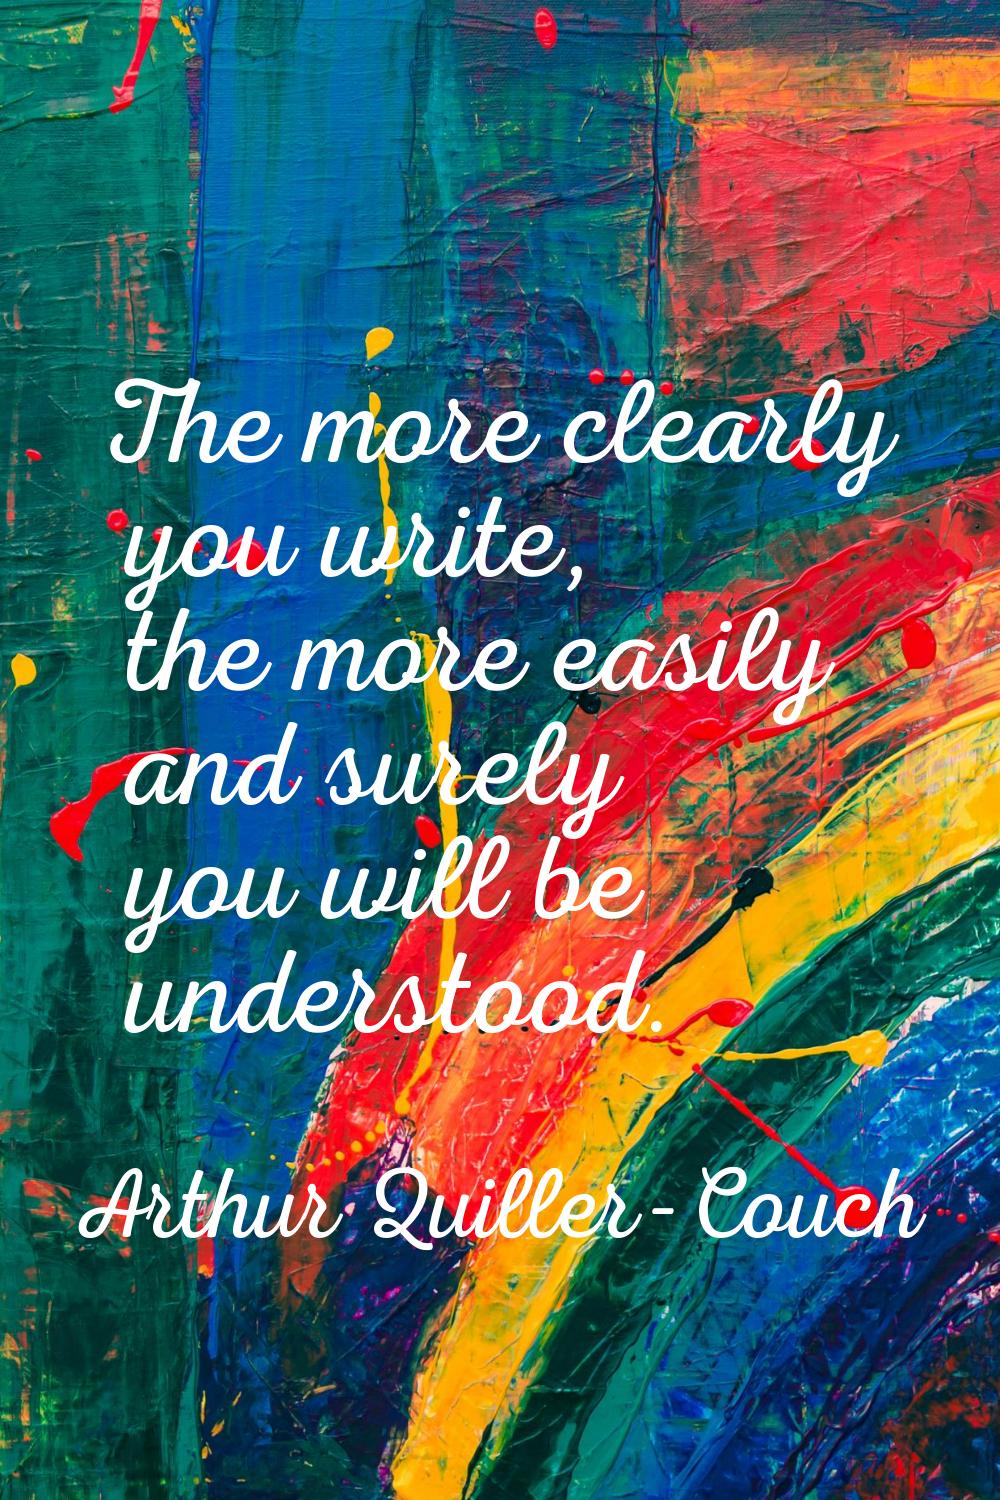 The more clearly you write, the more easily and surely you will be understood.